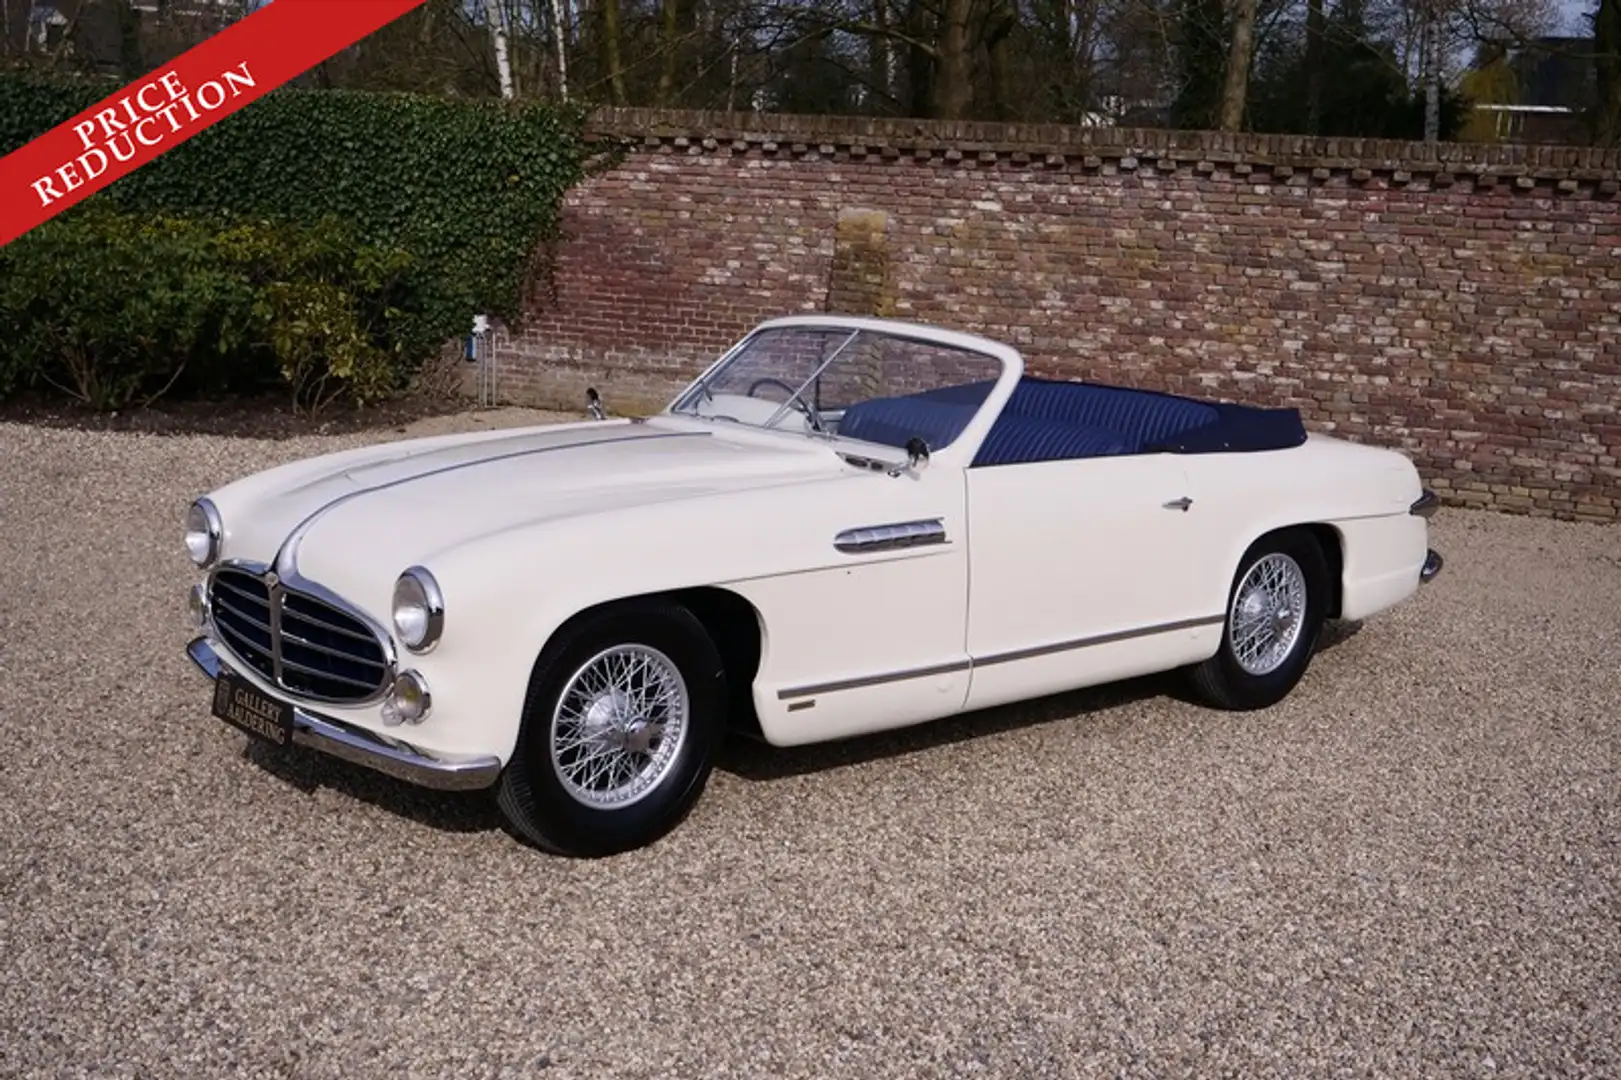 Oldtimer Delahaye 235 PRICE REDUCTION! Convertible by Antem. The 195 White - 1